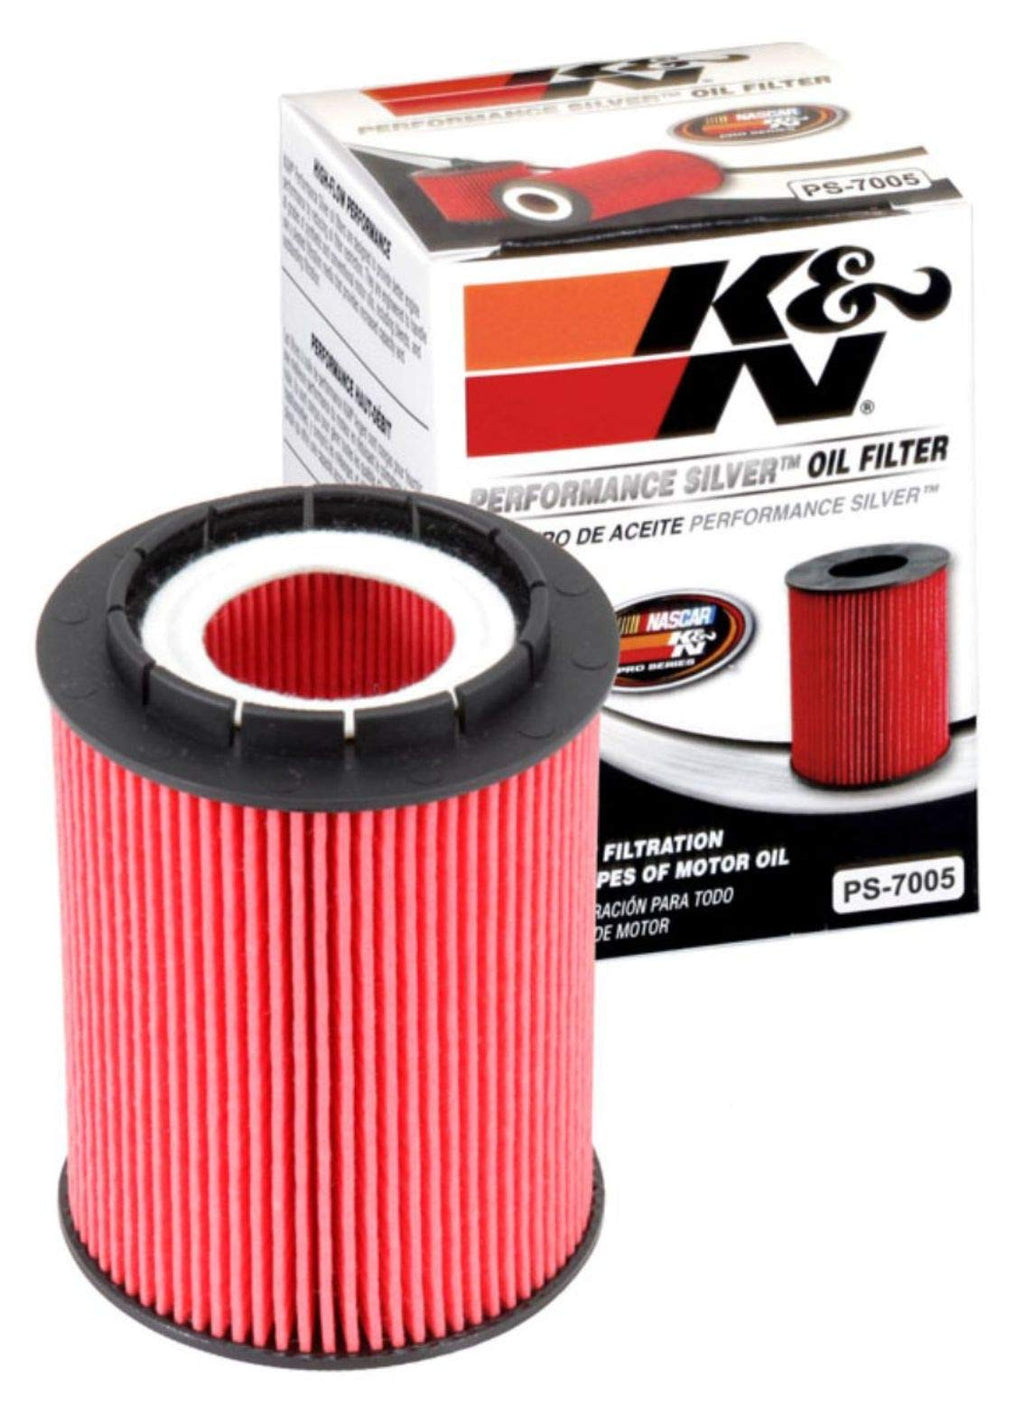 K&N Premium Oil Filter: Designed to Protect your Engine: Fits Select PORSCHE/AUDI/VOLKSWAGEN/JEEP Vehicle Models (See Product Description for Full List of Compatible Vehicles), PS-7005 - LeoForward Australia